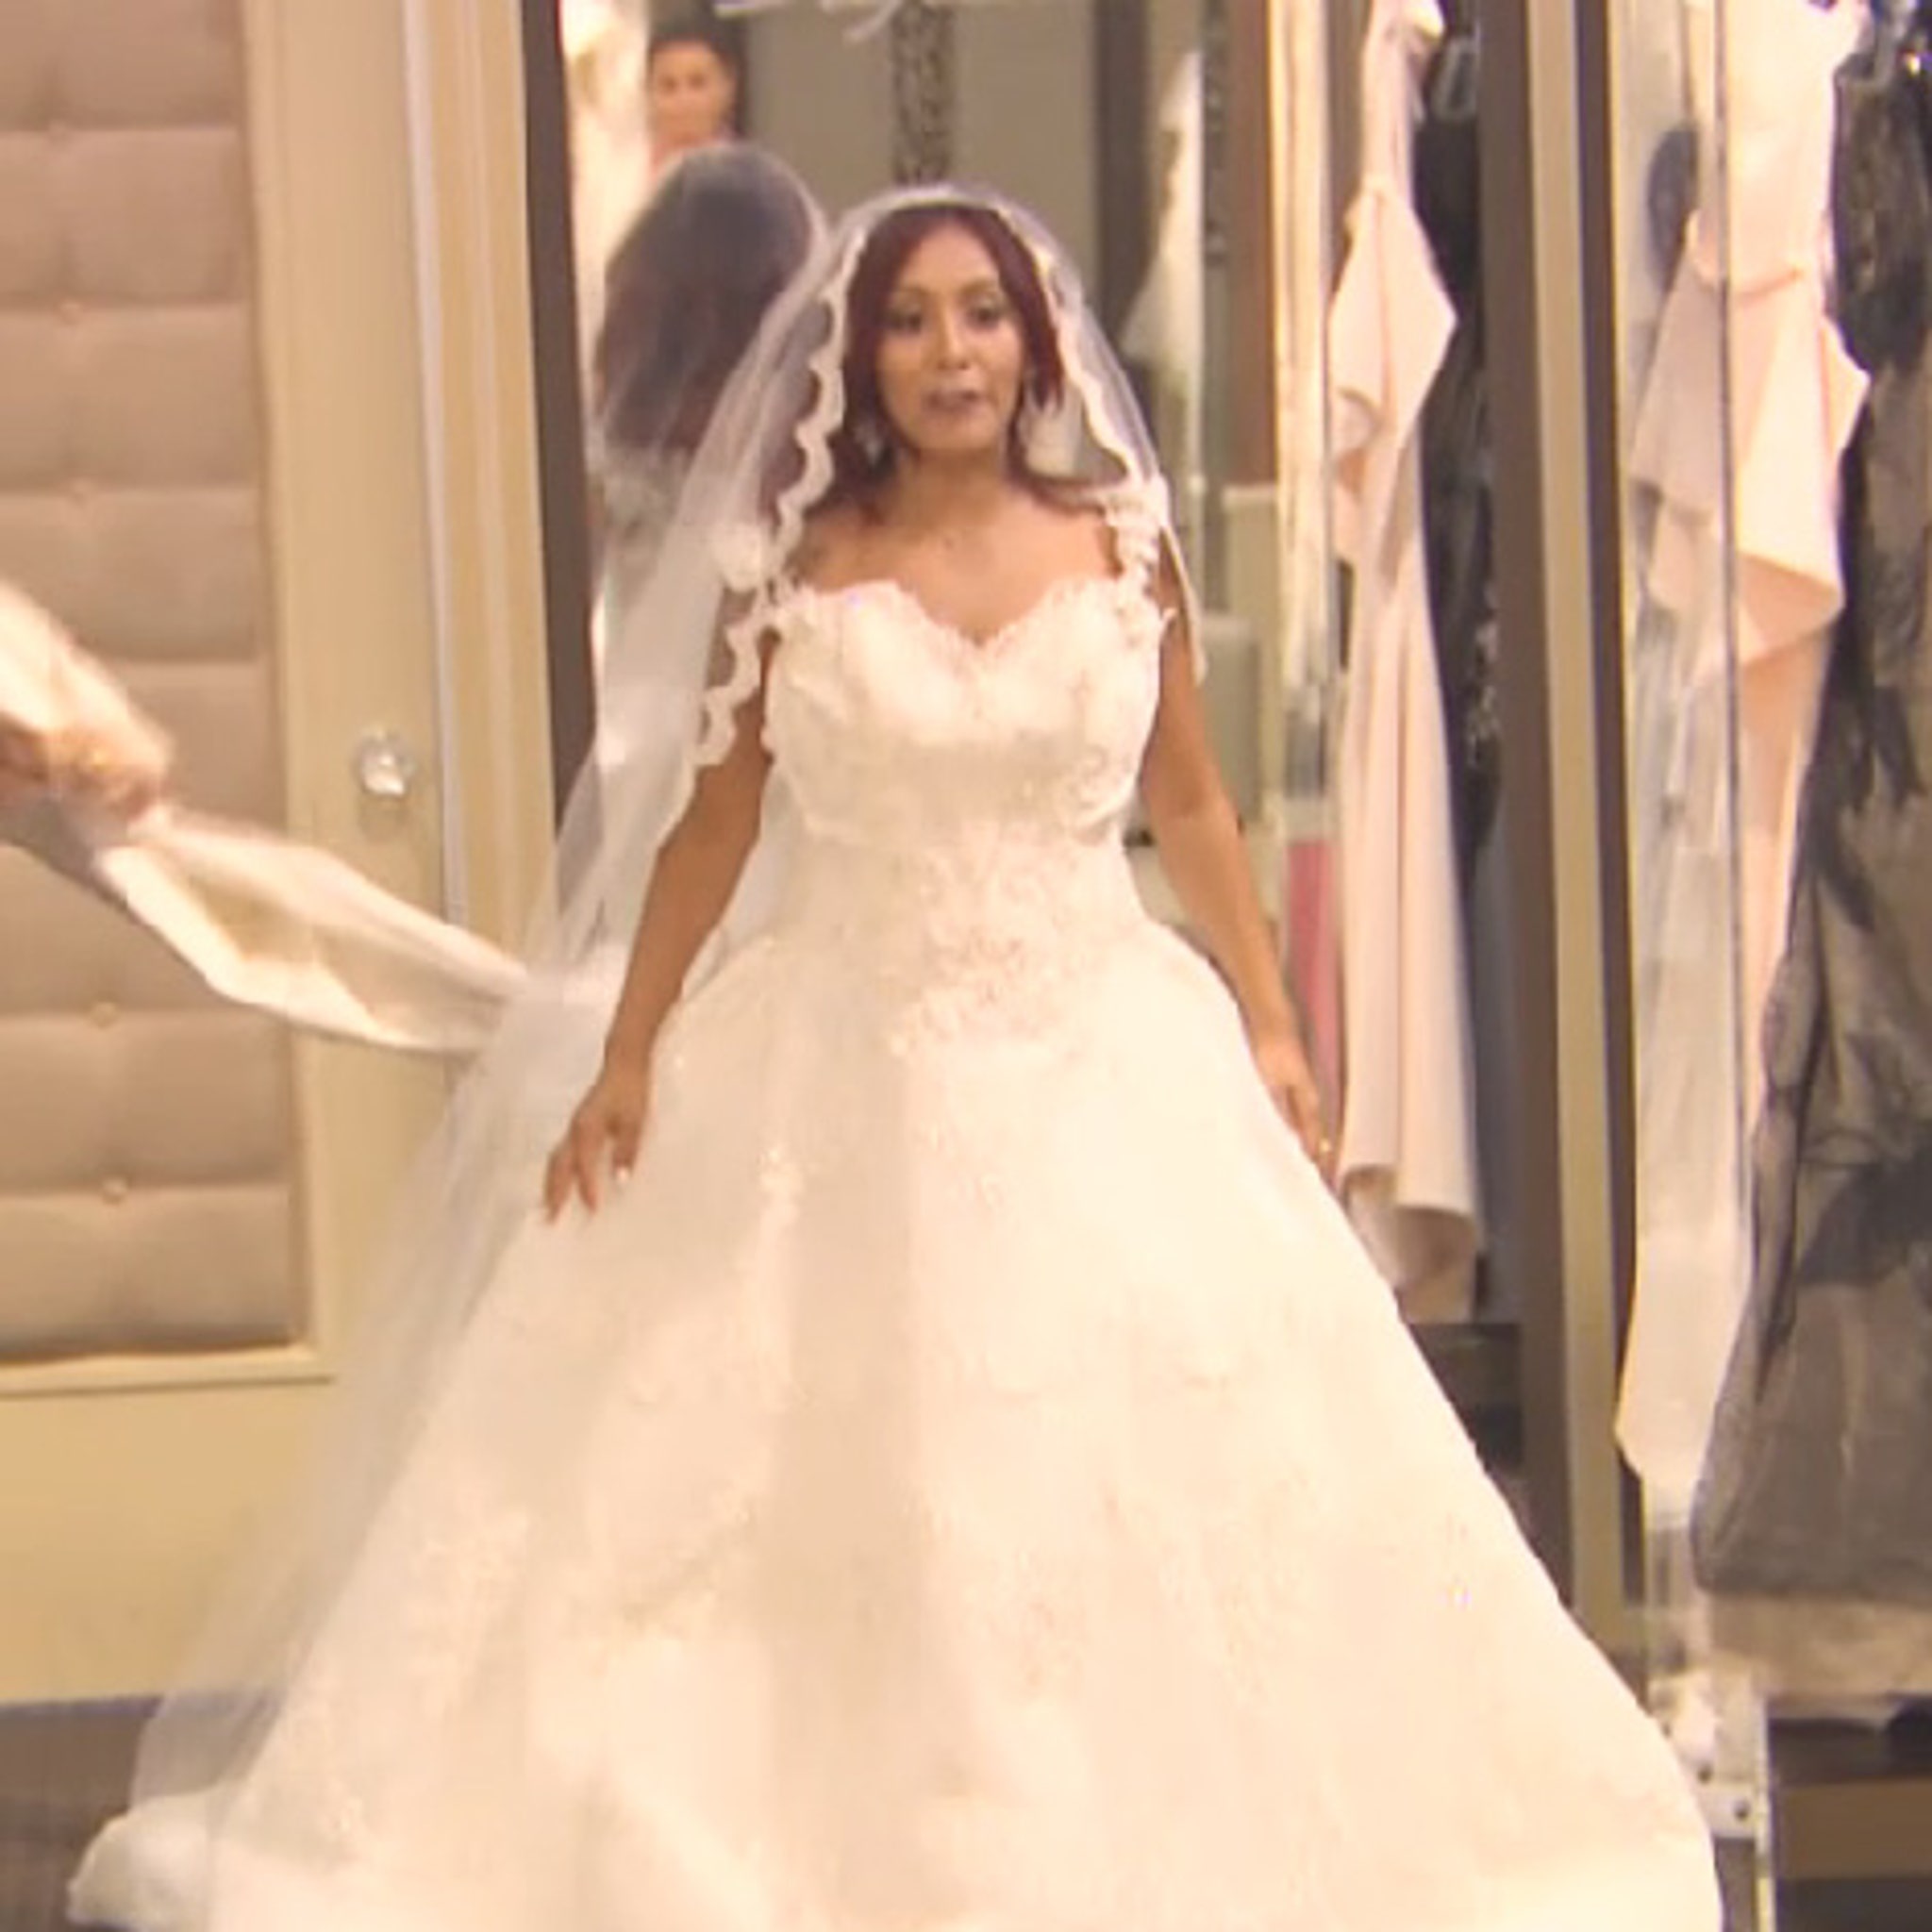 Snooki and JWoww Freak Out While Trying On Wedding Dresses. Get